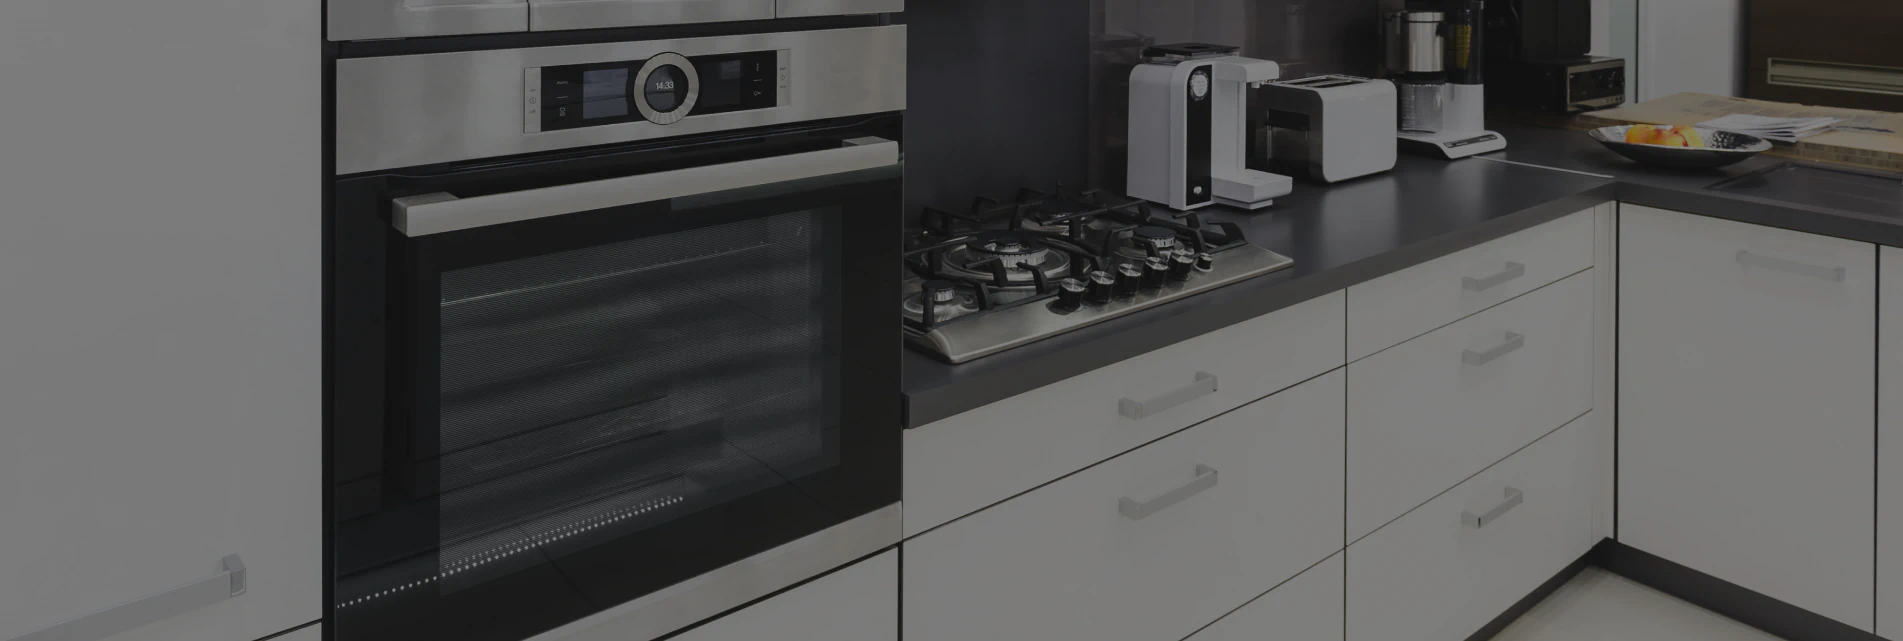 close up shot of oven in modern kitchen